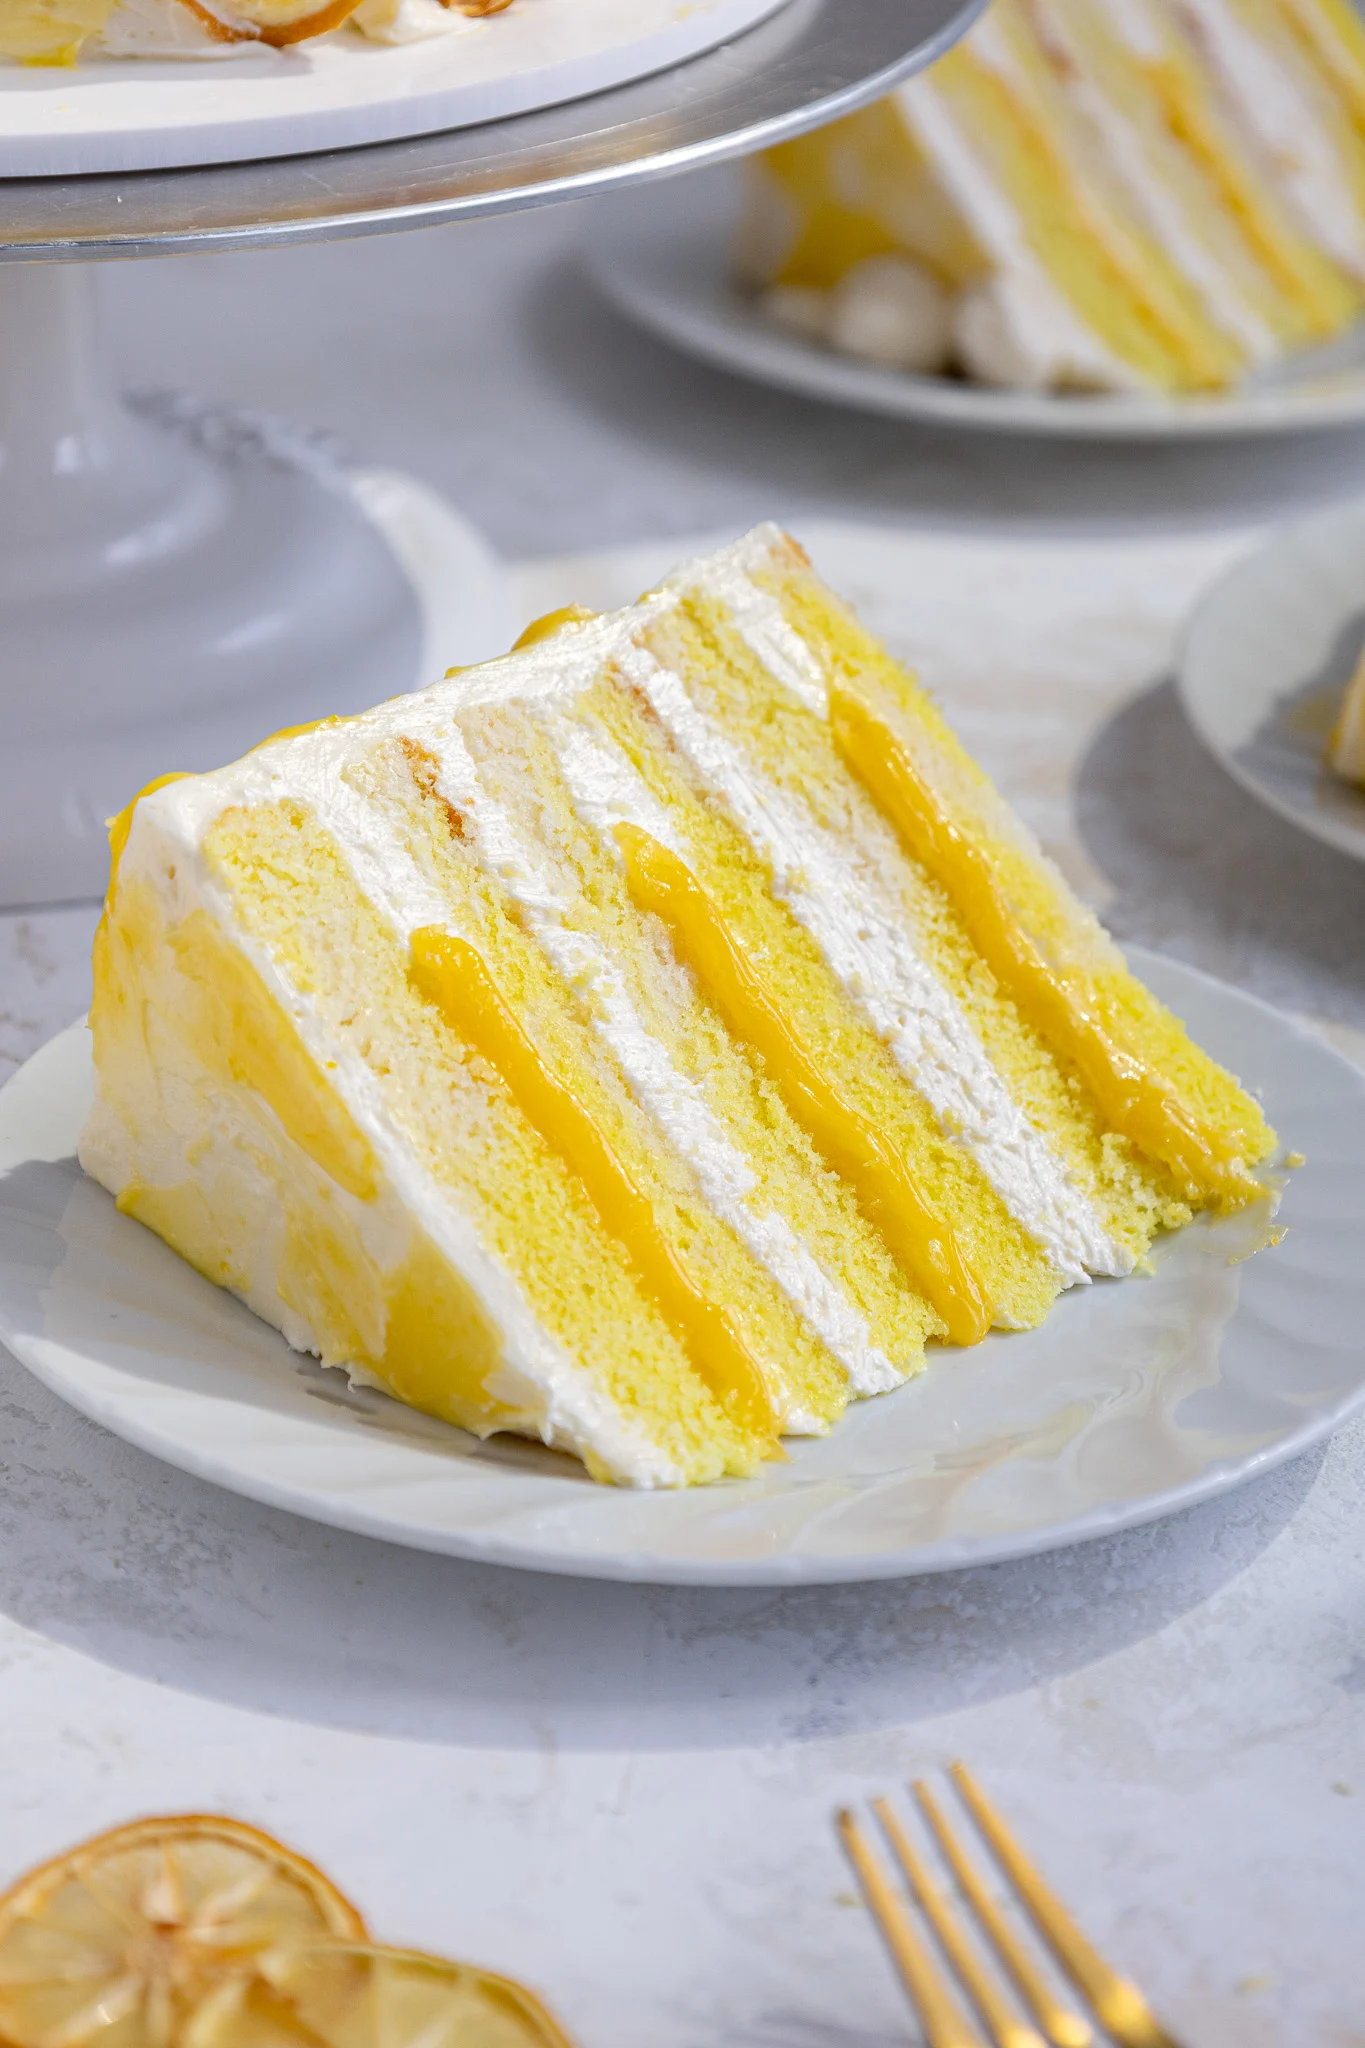 image of a slice of lemon curd cake on a plate